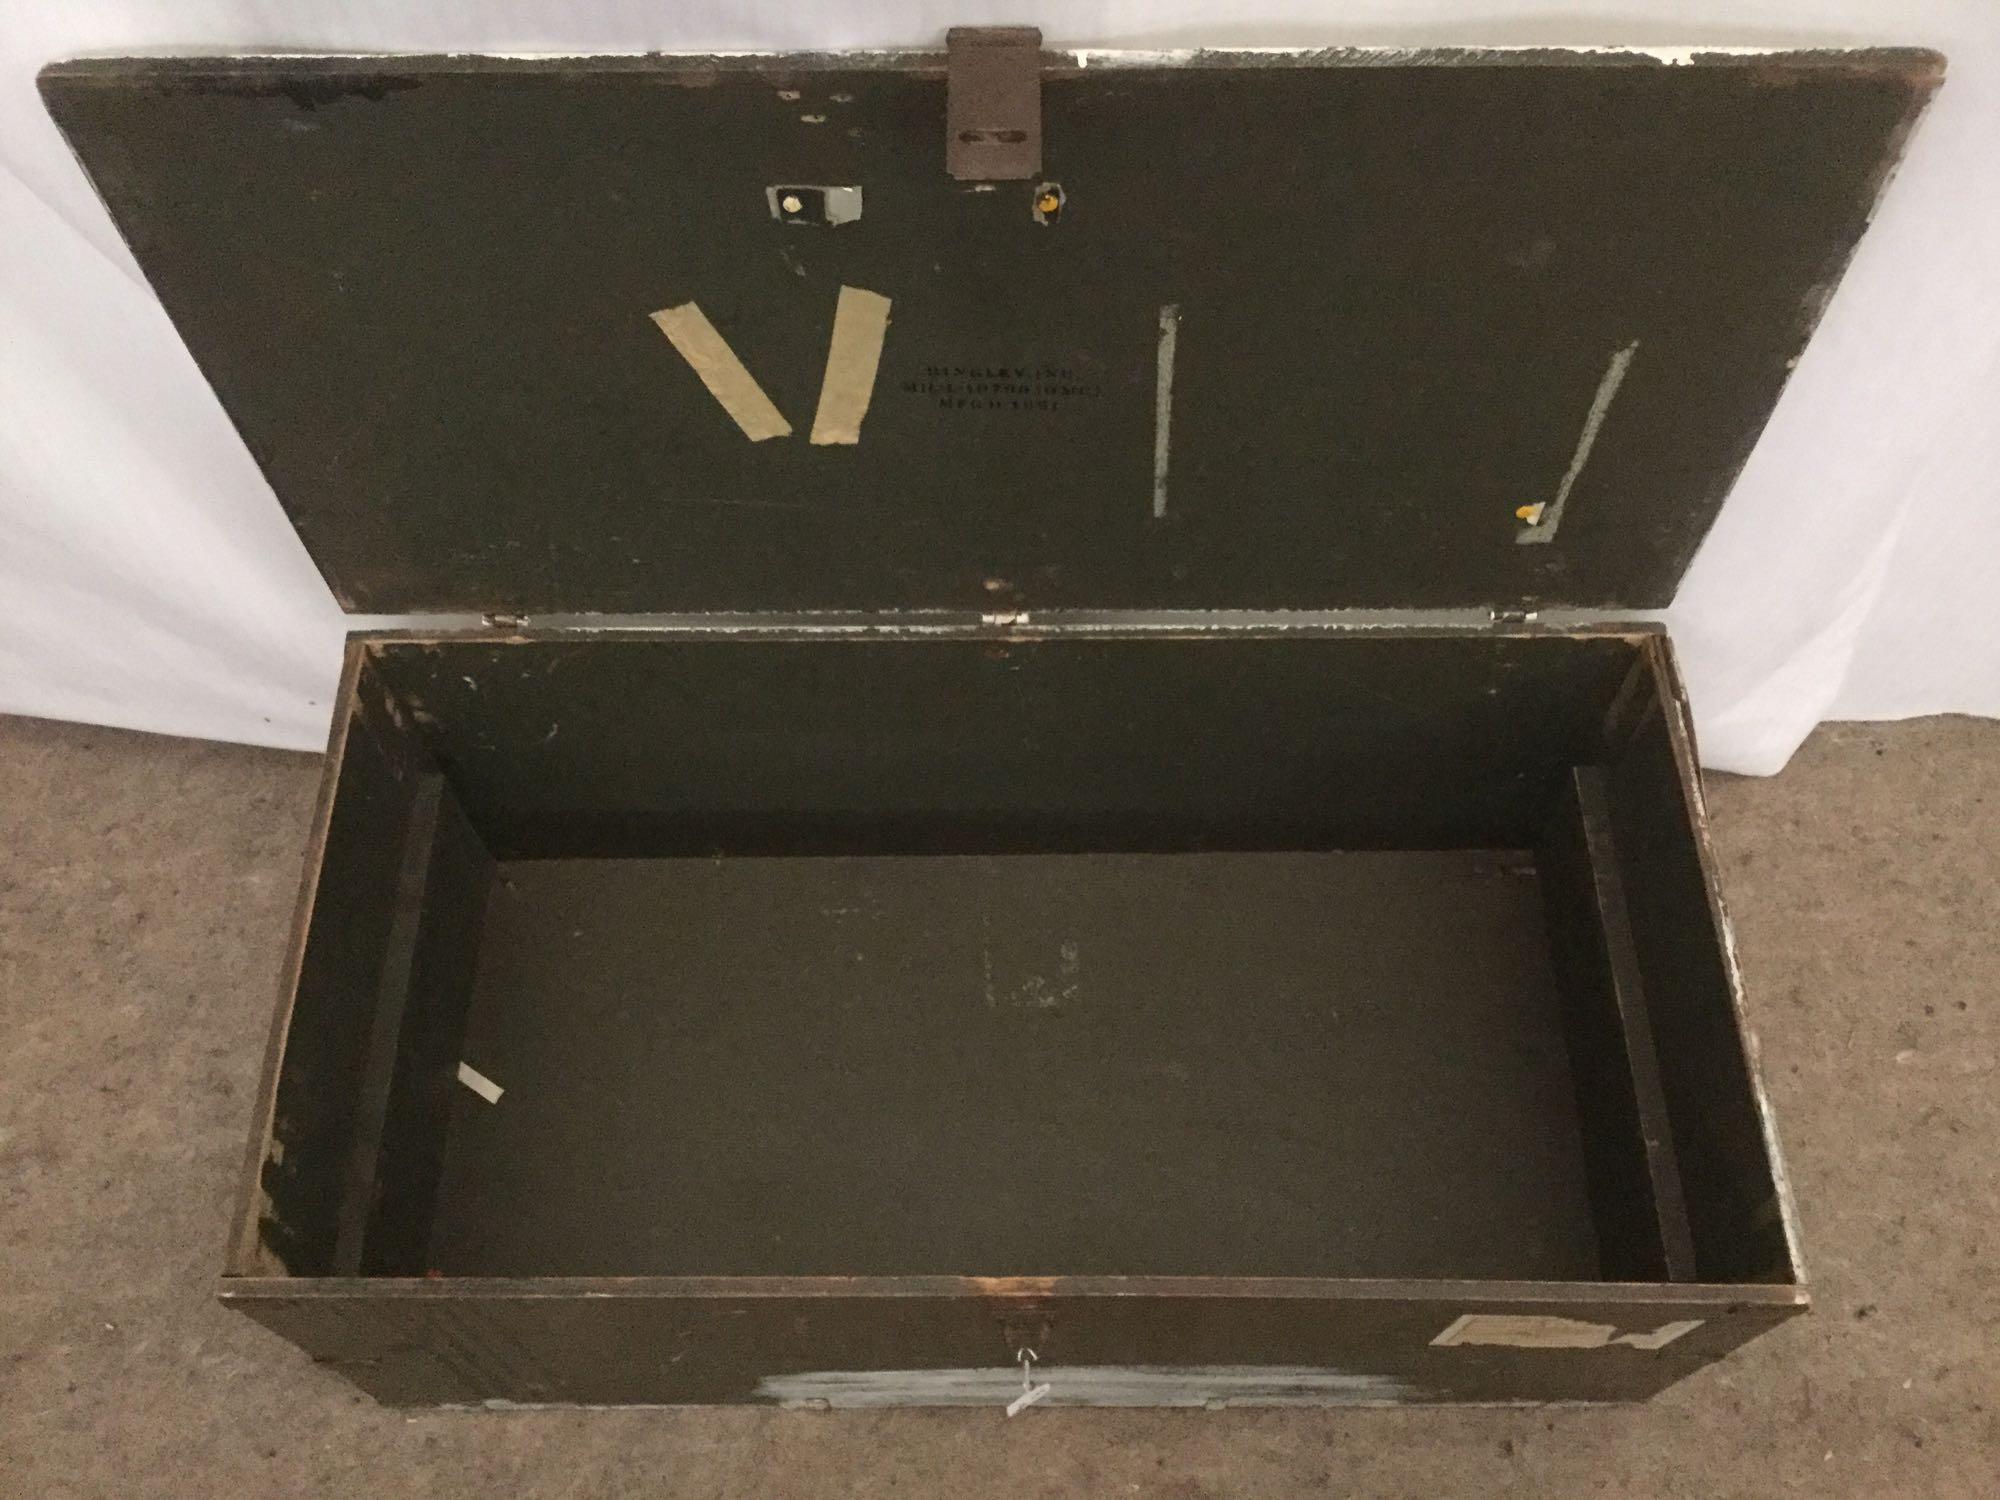 3 vintage green military footlocker storage trunks incl. 1 1951 Green Bingley trunk and more